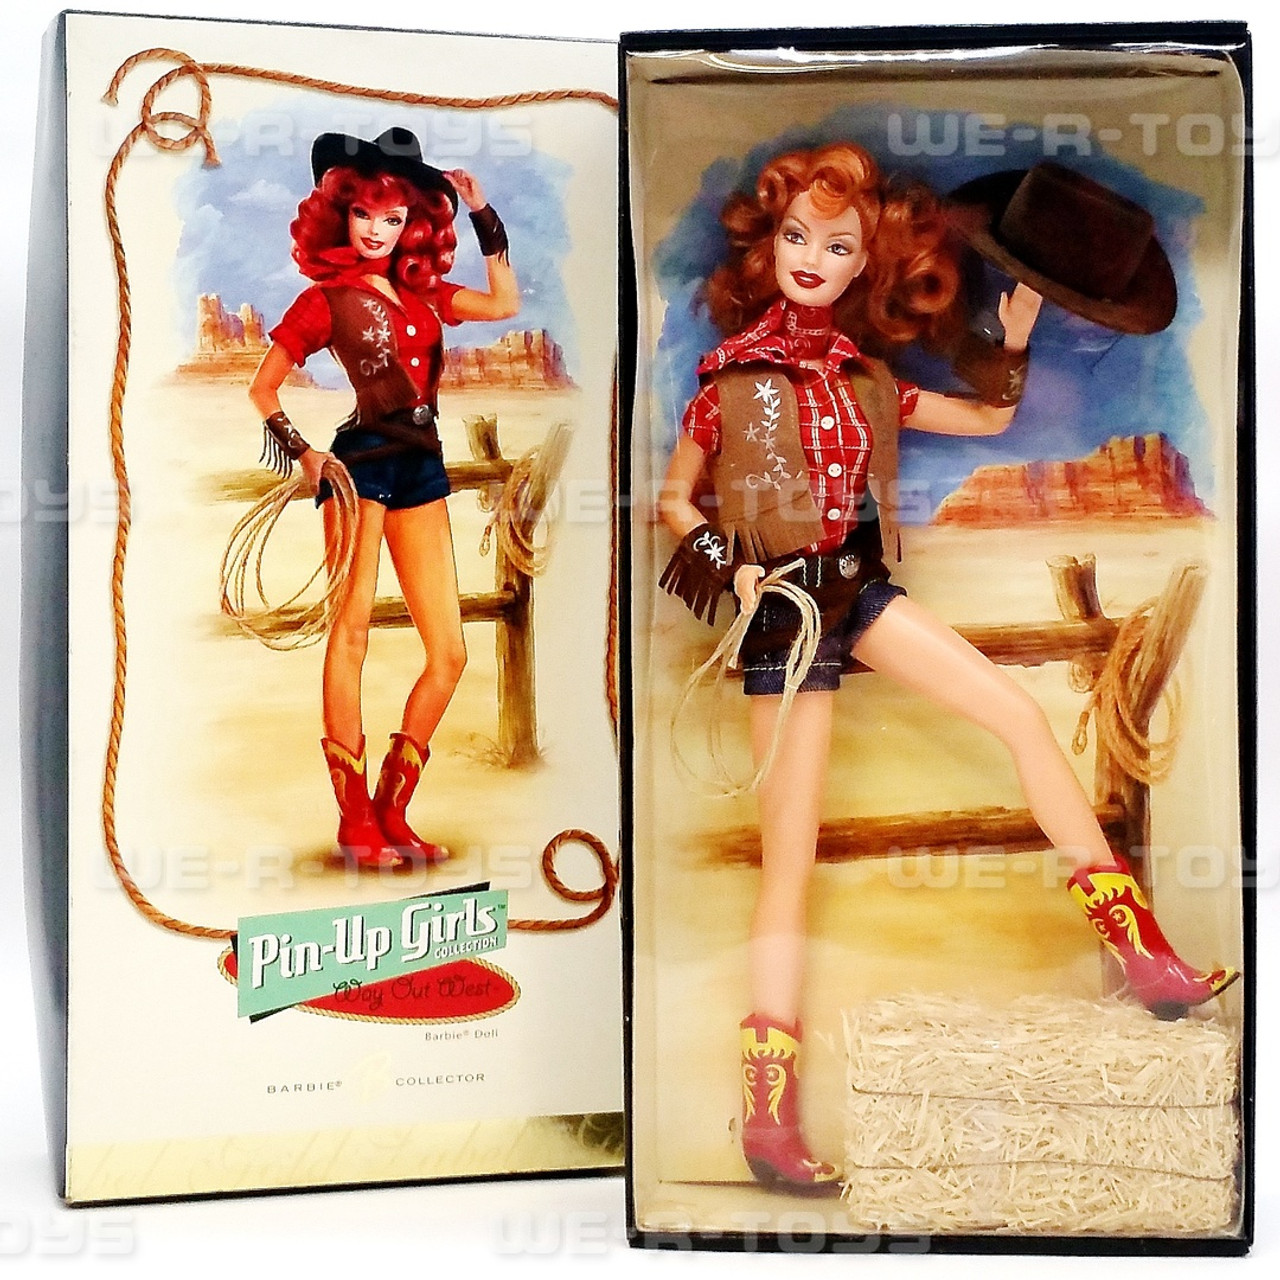 Barbie Pin-Up Girls Collection Way Out West Doll 2005 Mattel #J0934